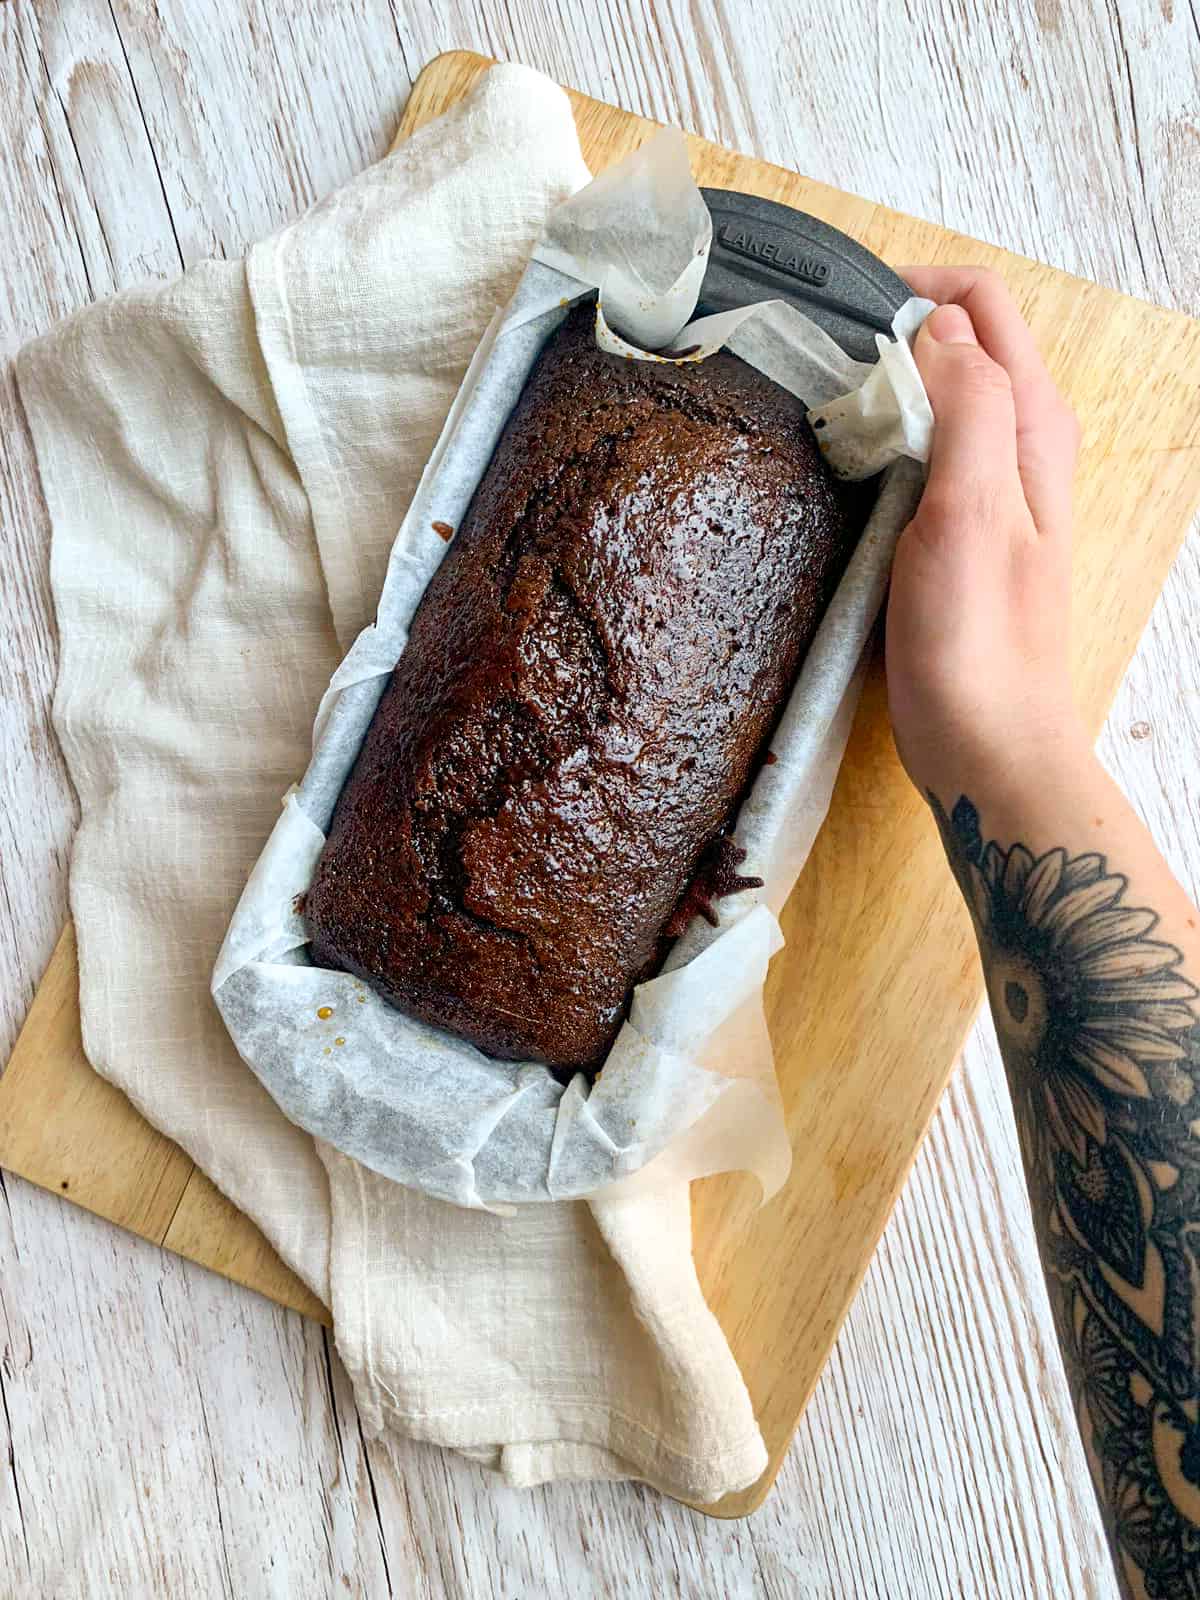 Vegan Ginger Cake: A must-try vegan ginger cake recipe. This sticky jamaican gingerbread cake is the perfect vegan loaf cake suitable for a plant-based diet. This ginger cake is egg and dairy-free, and one of my all-time favorite vegan baking recipes.